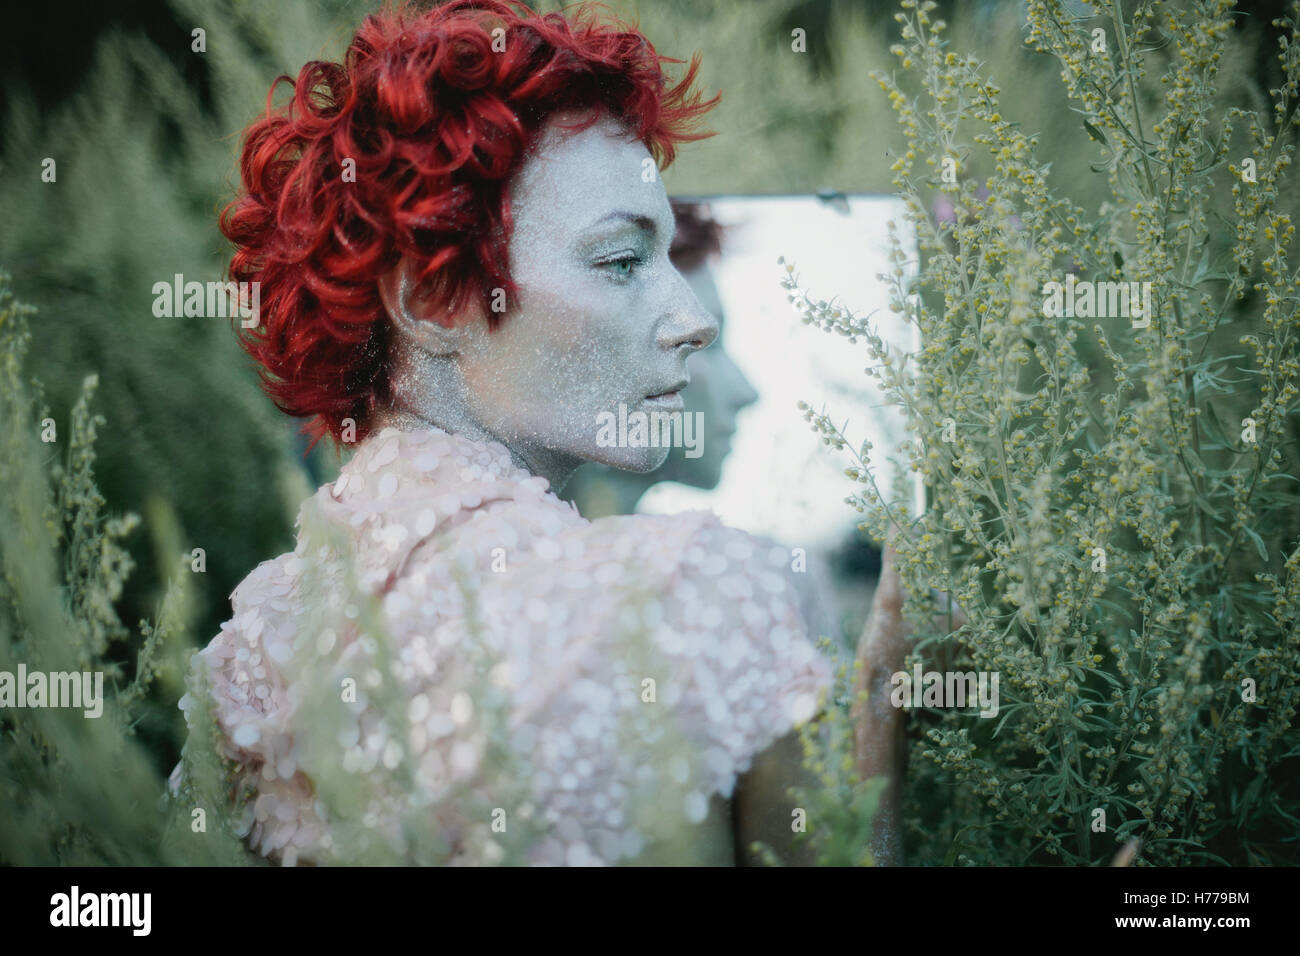 Portrait of a woman with a painted silver face and red hair Stock Photo